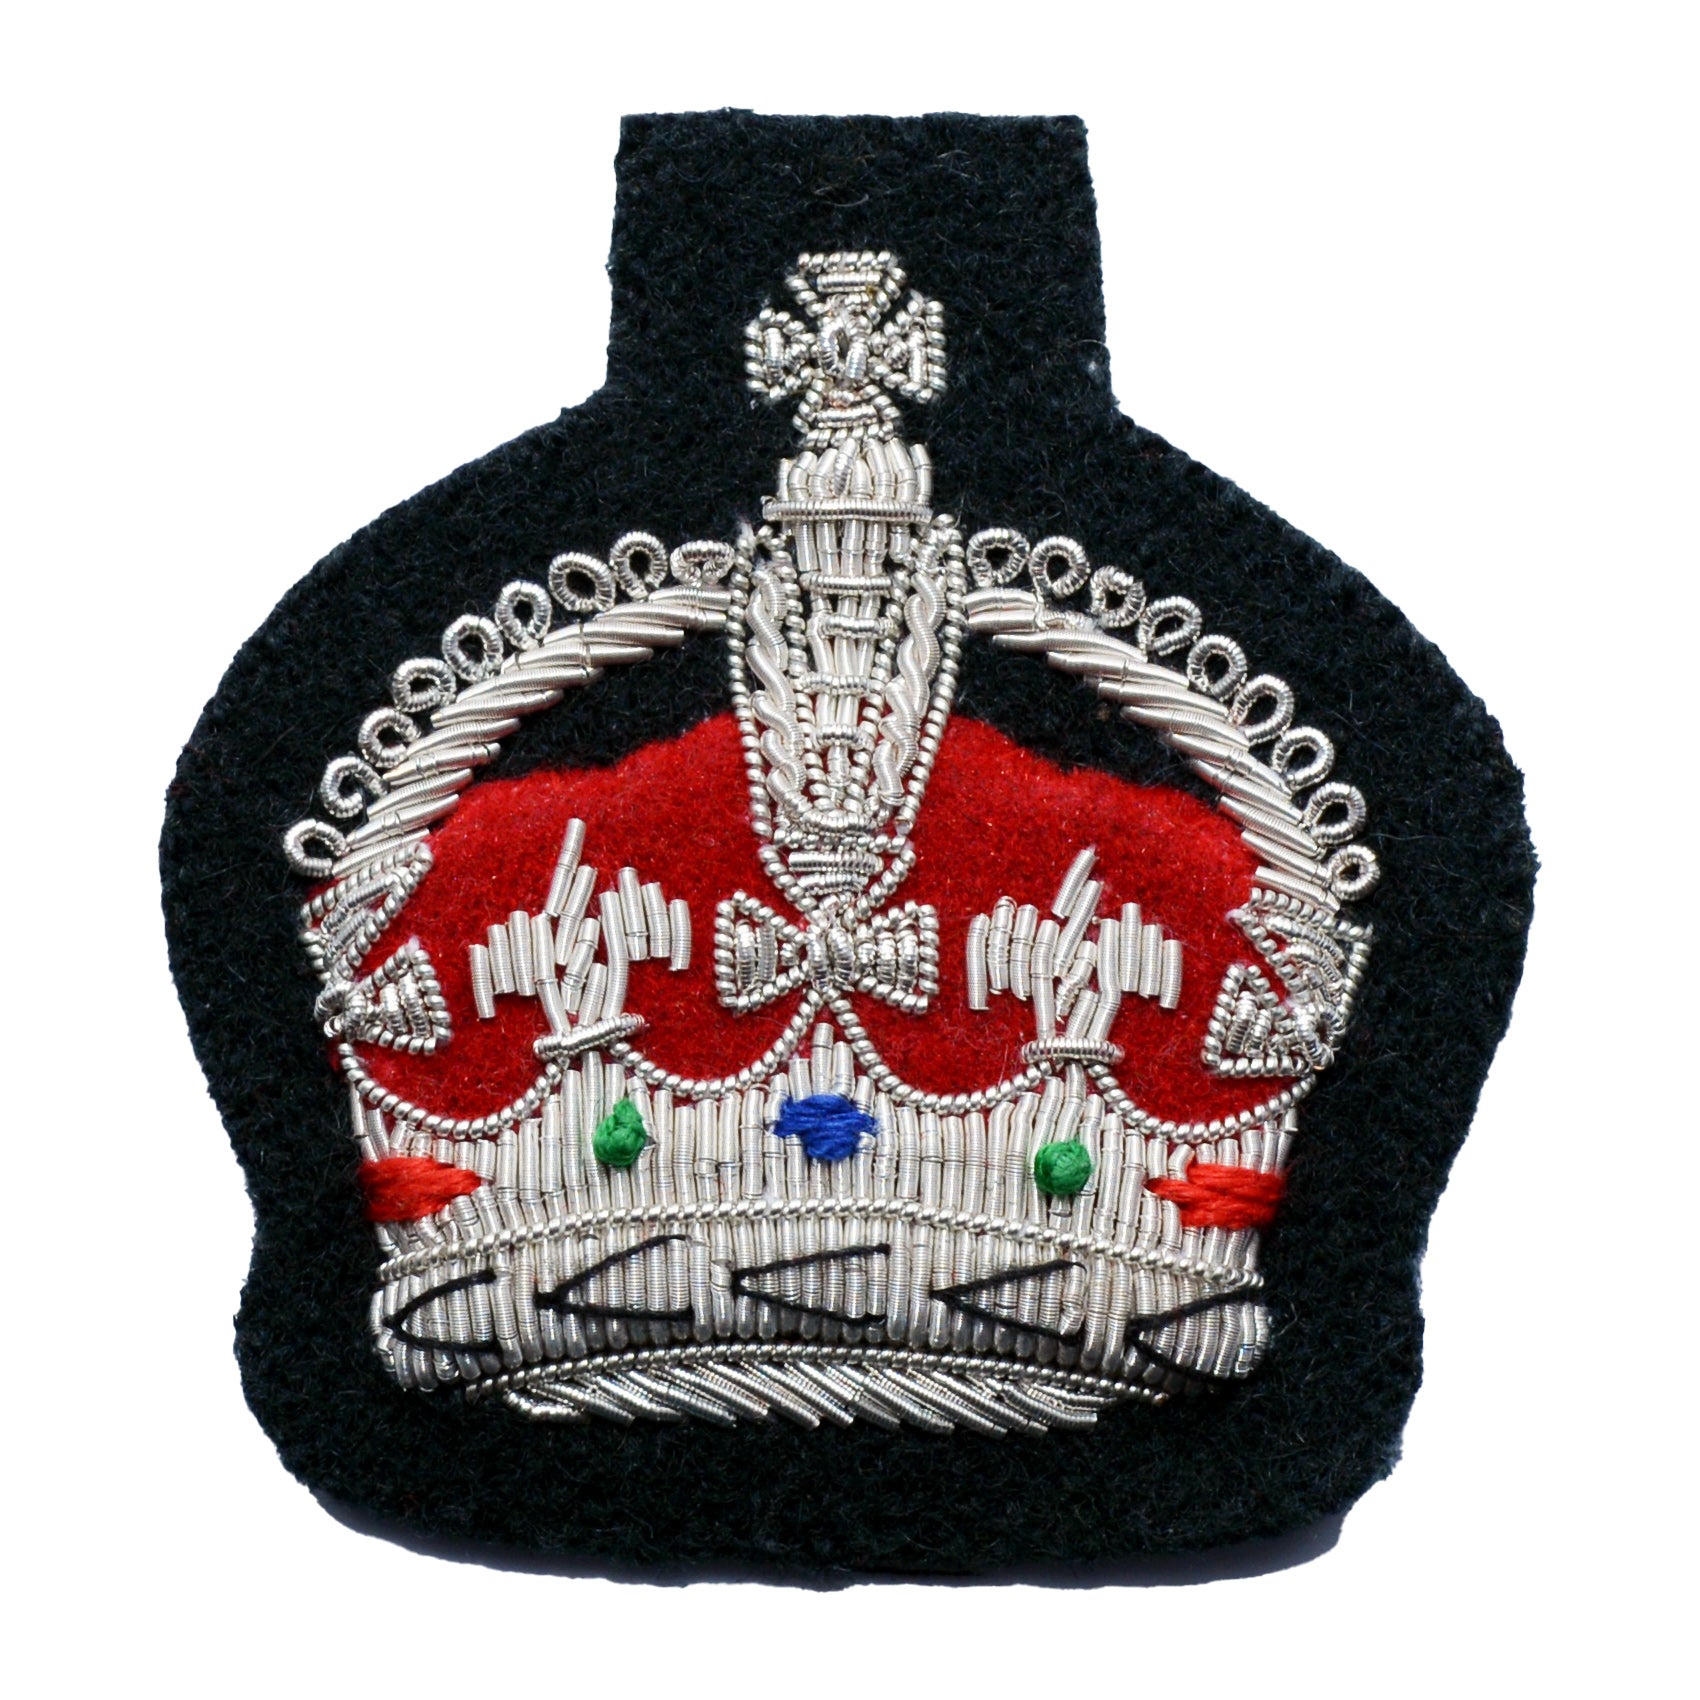 (King's Crown) QMS, CSgt and SSgt Small Crown Rank Badge Royal Irish Regiment British Army